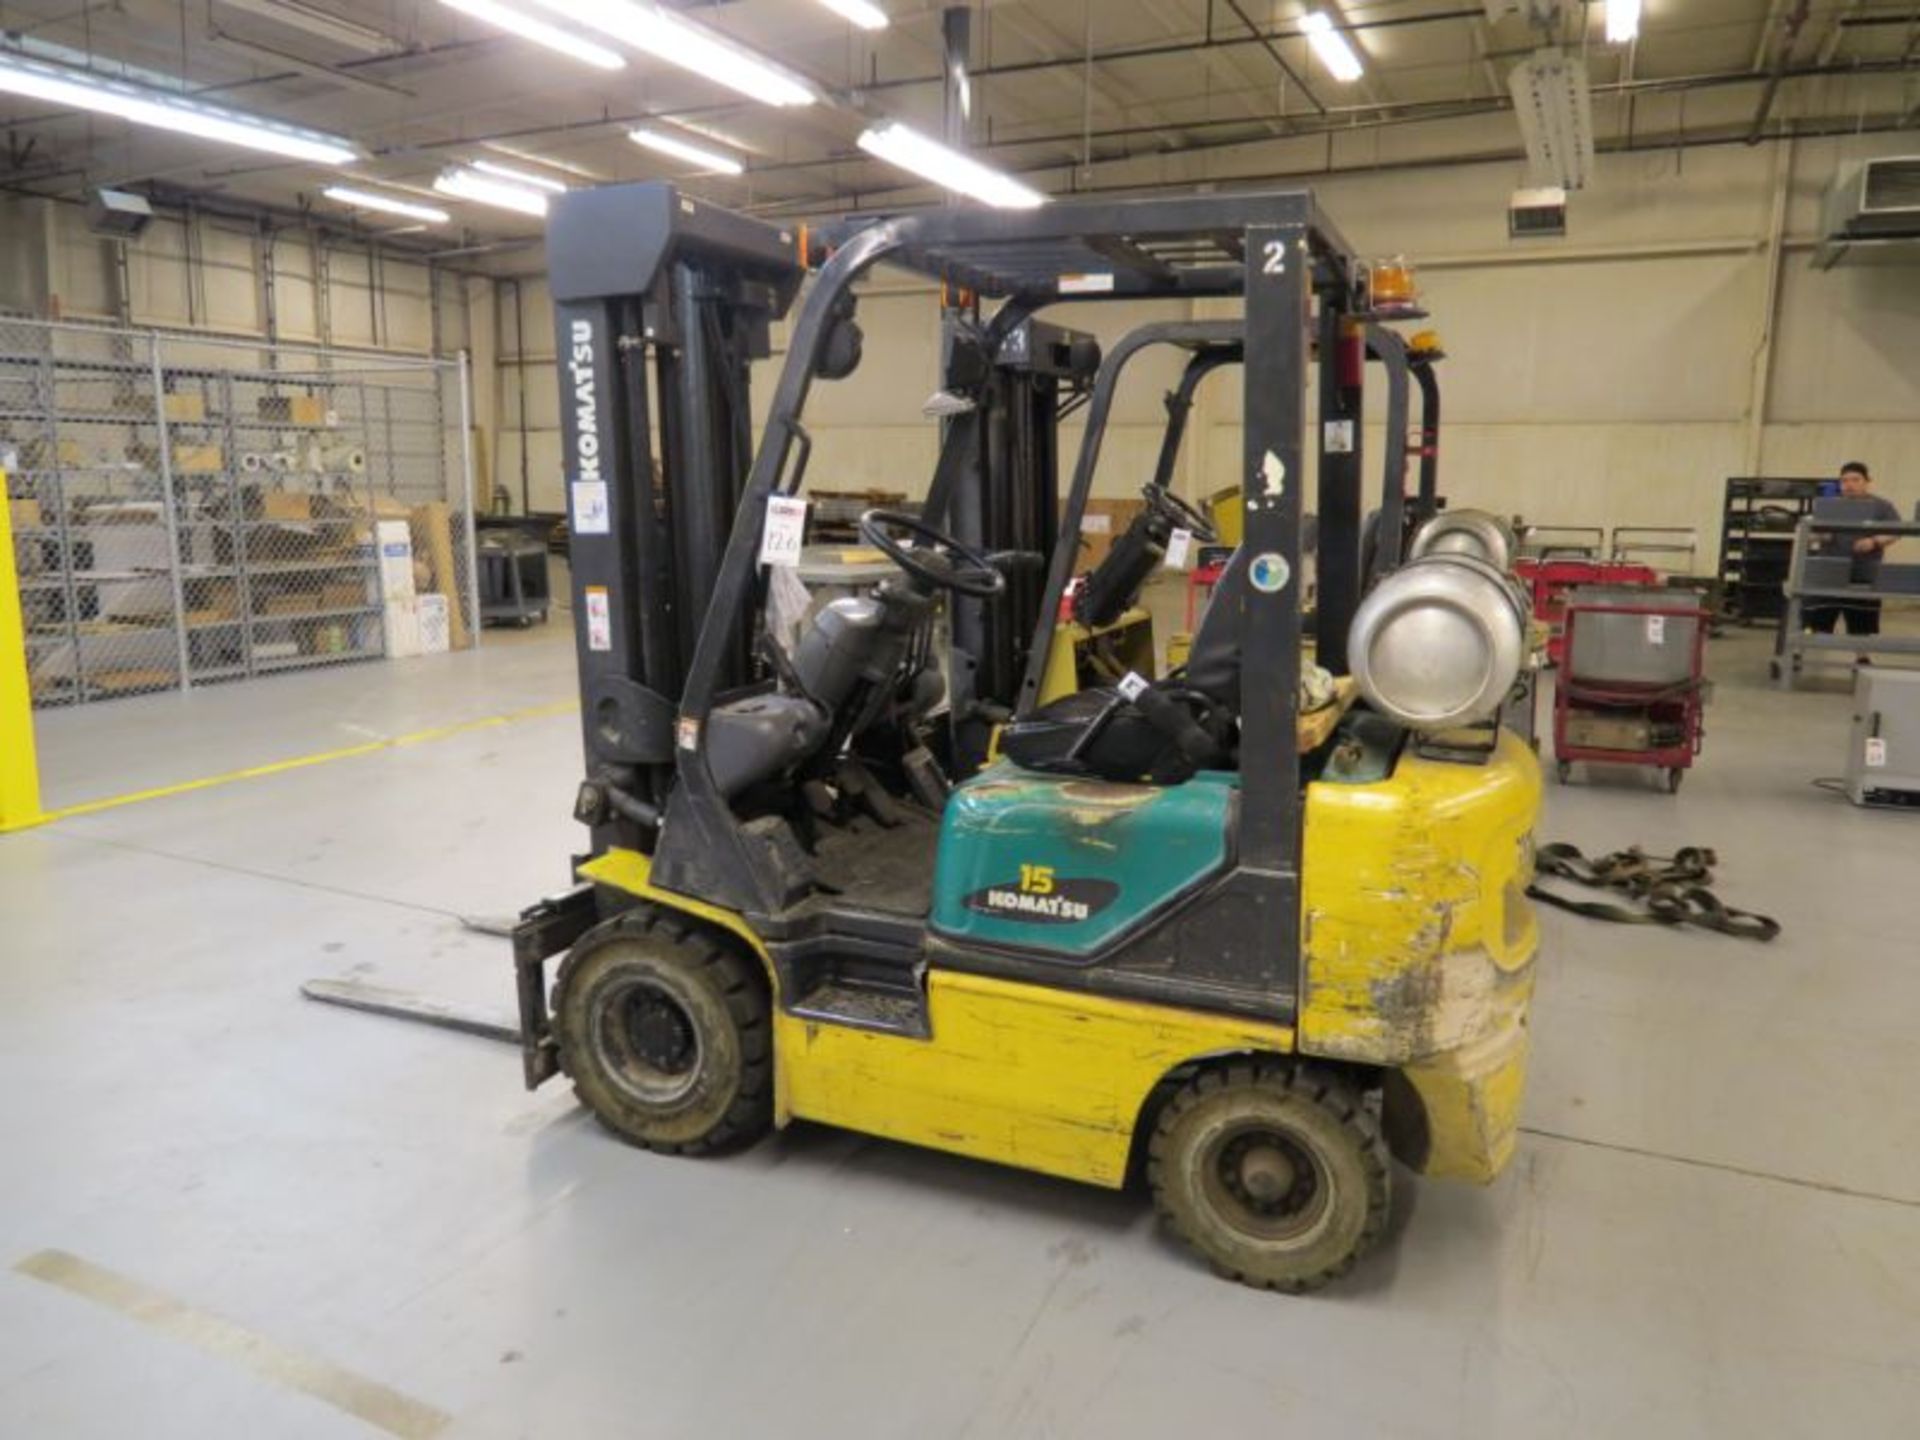 Komatsu FG15HT-17 Fork Lift, capacity 4000lbs, late s/n 671902A, hours: 0344926, (Late Delivery) - Image 2 of 4